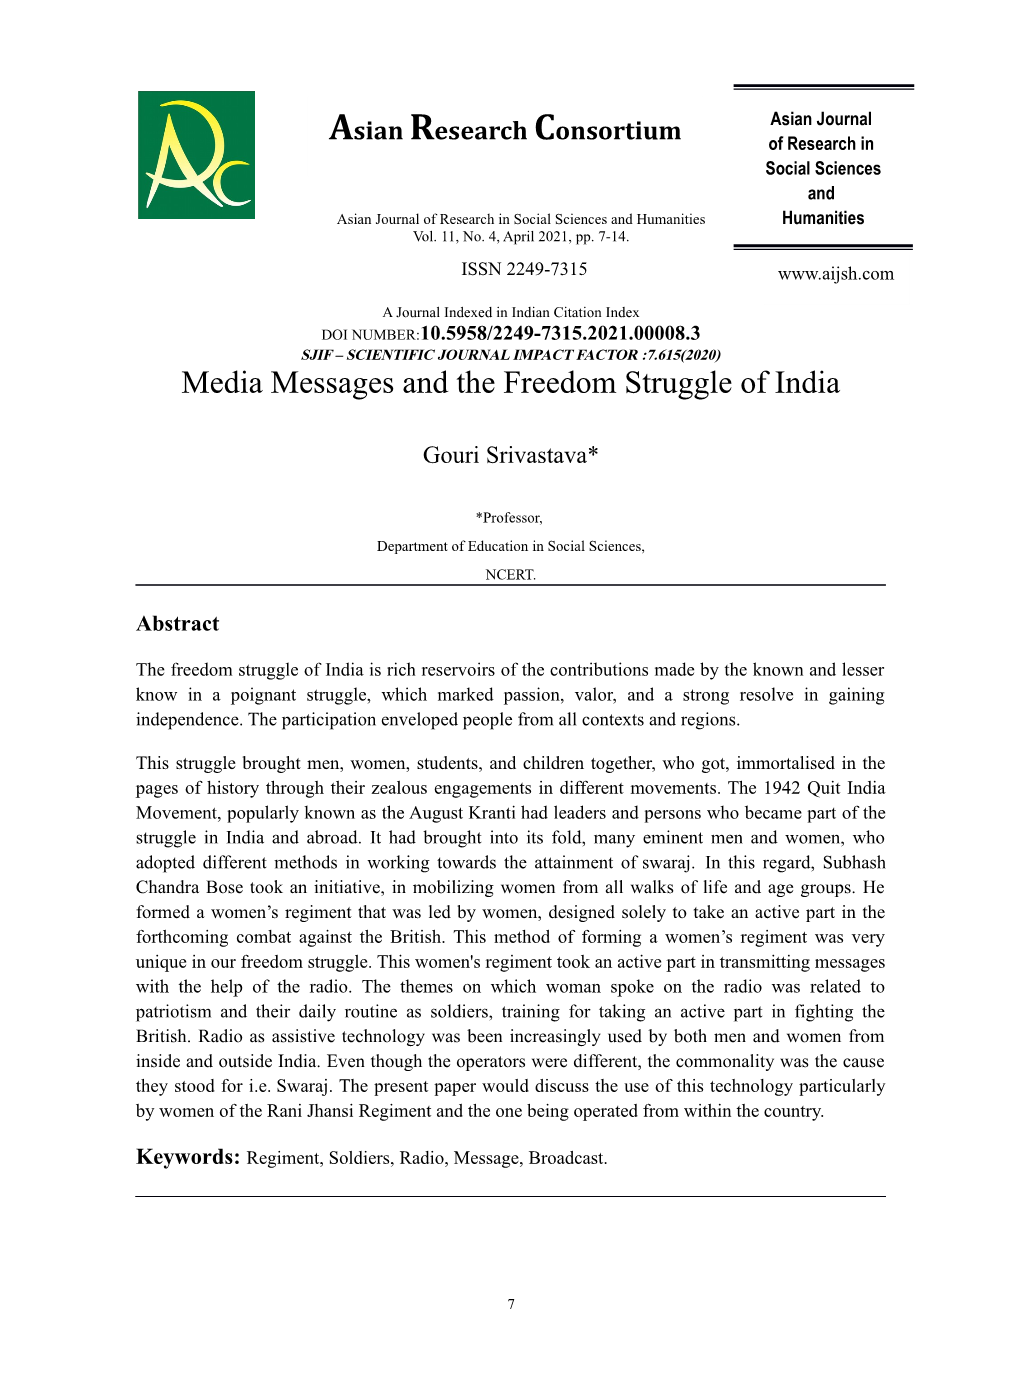 Media Messages and the Freedom Struggle of India